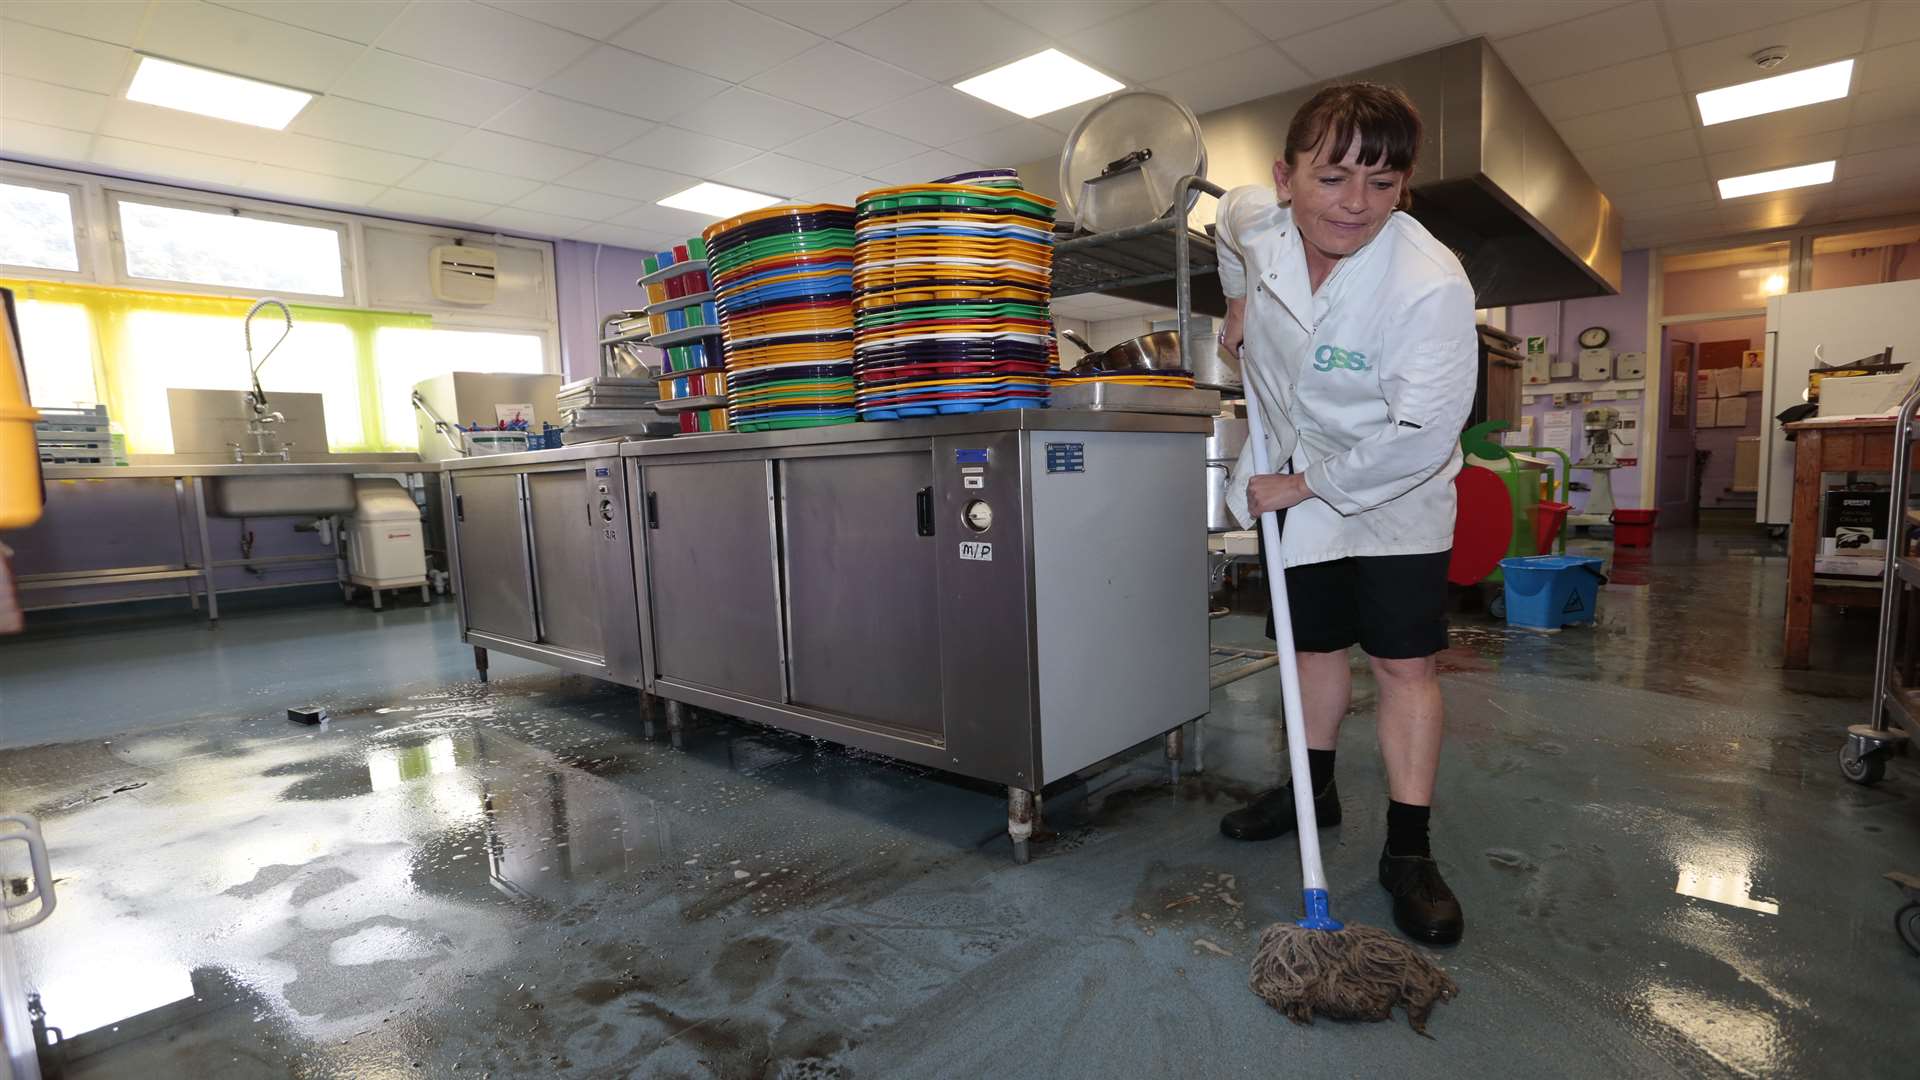 Clare Bush cleans the school's kitchen which will have to be fully sanitized after three inches of flood water left sediment covering the floor